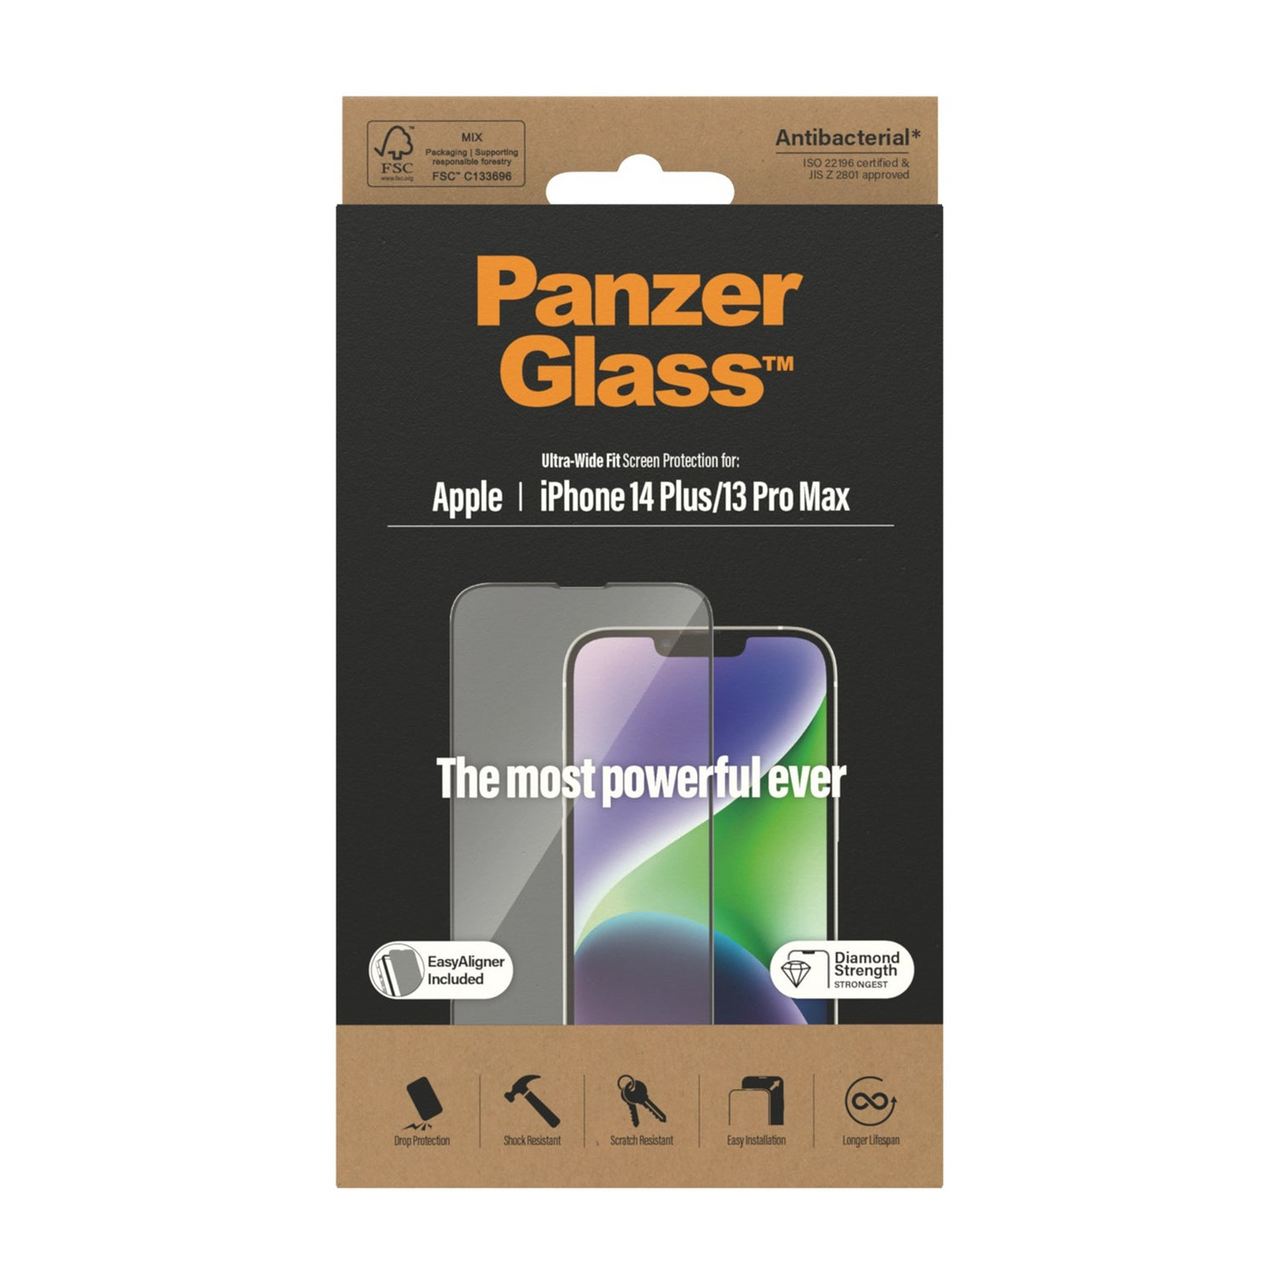 PanzerGlass Screen Protector Apple iPhone 14 Plus 13 Pro Max Ultra-Wide Fit w. EasyAligner